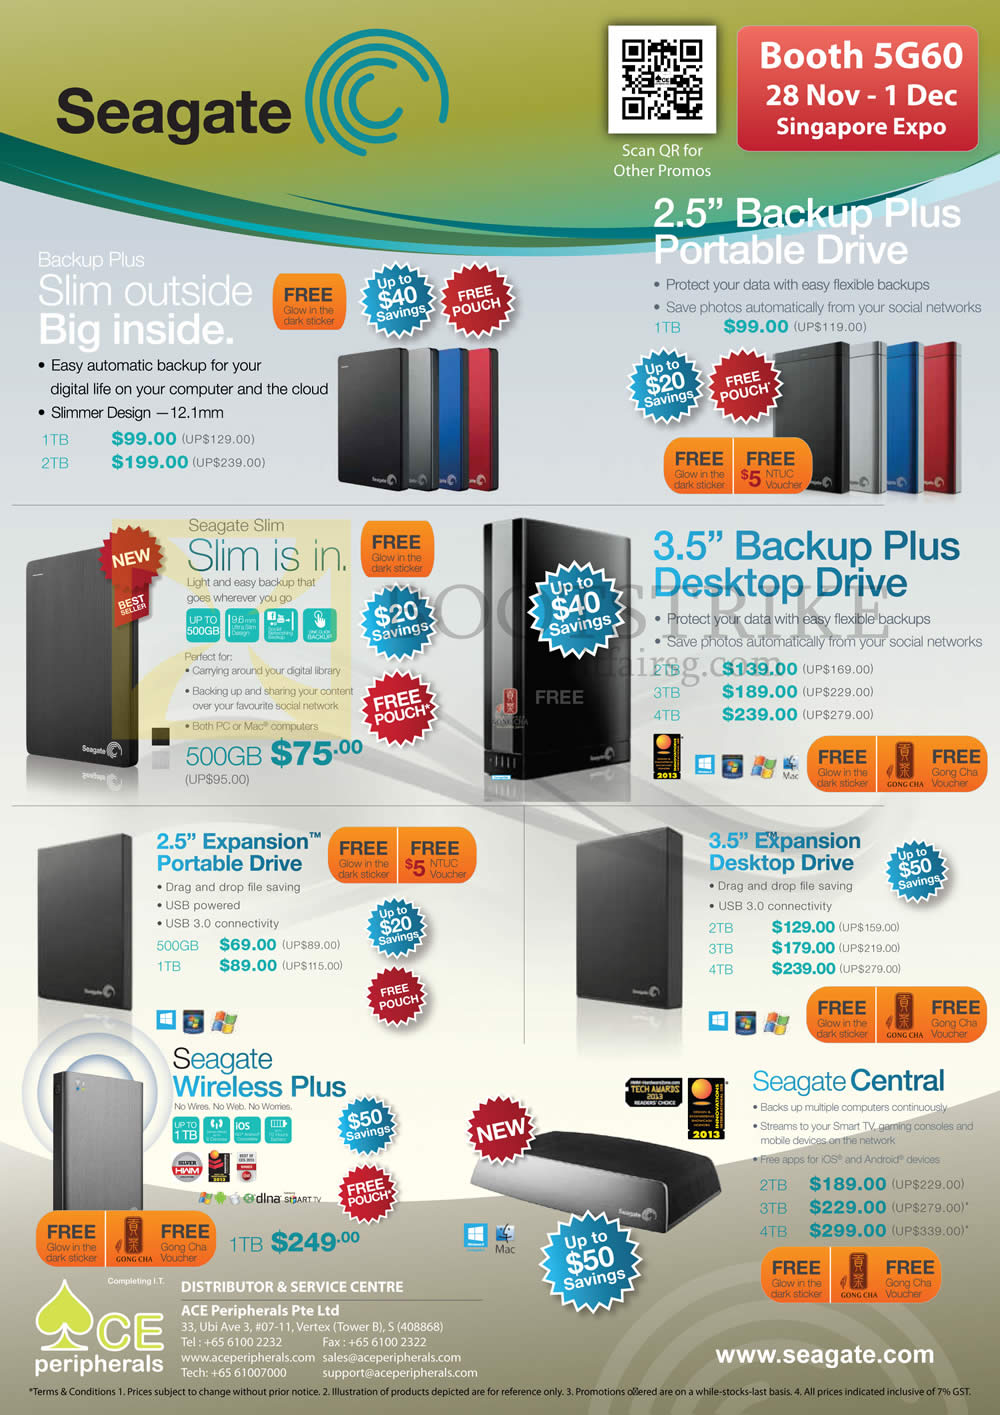 SITEX 2013 price list image brochure of Ace Peripherals Seagate Central Wireless Backup Plus, Slim Expansion, Desktop External Storage Drive, HDD 500GB 1TB 2TB 3TB 4TB